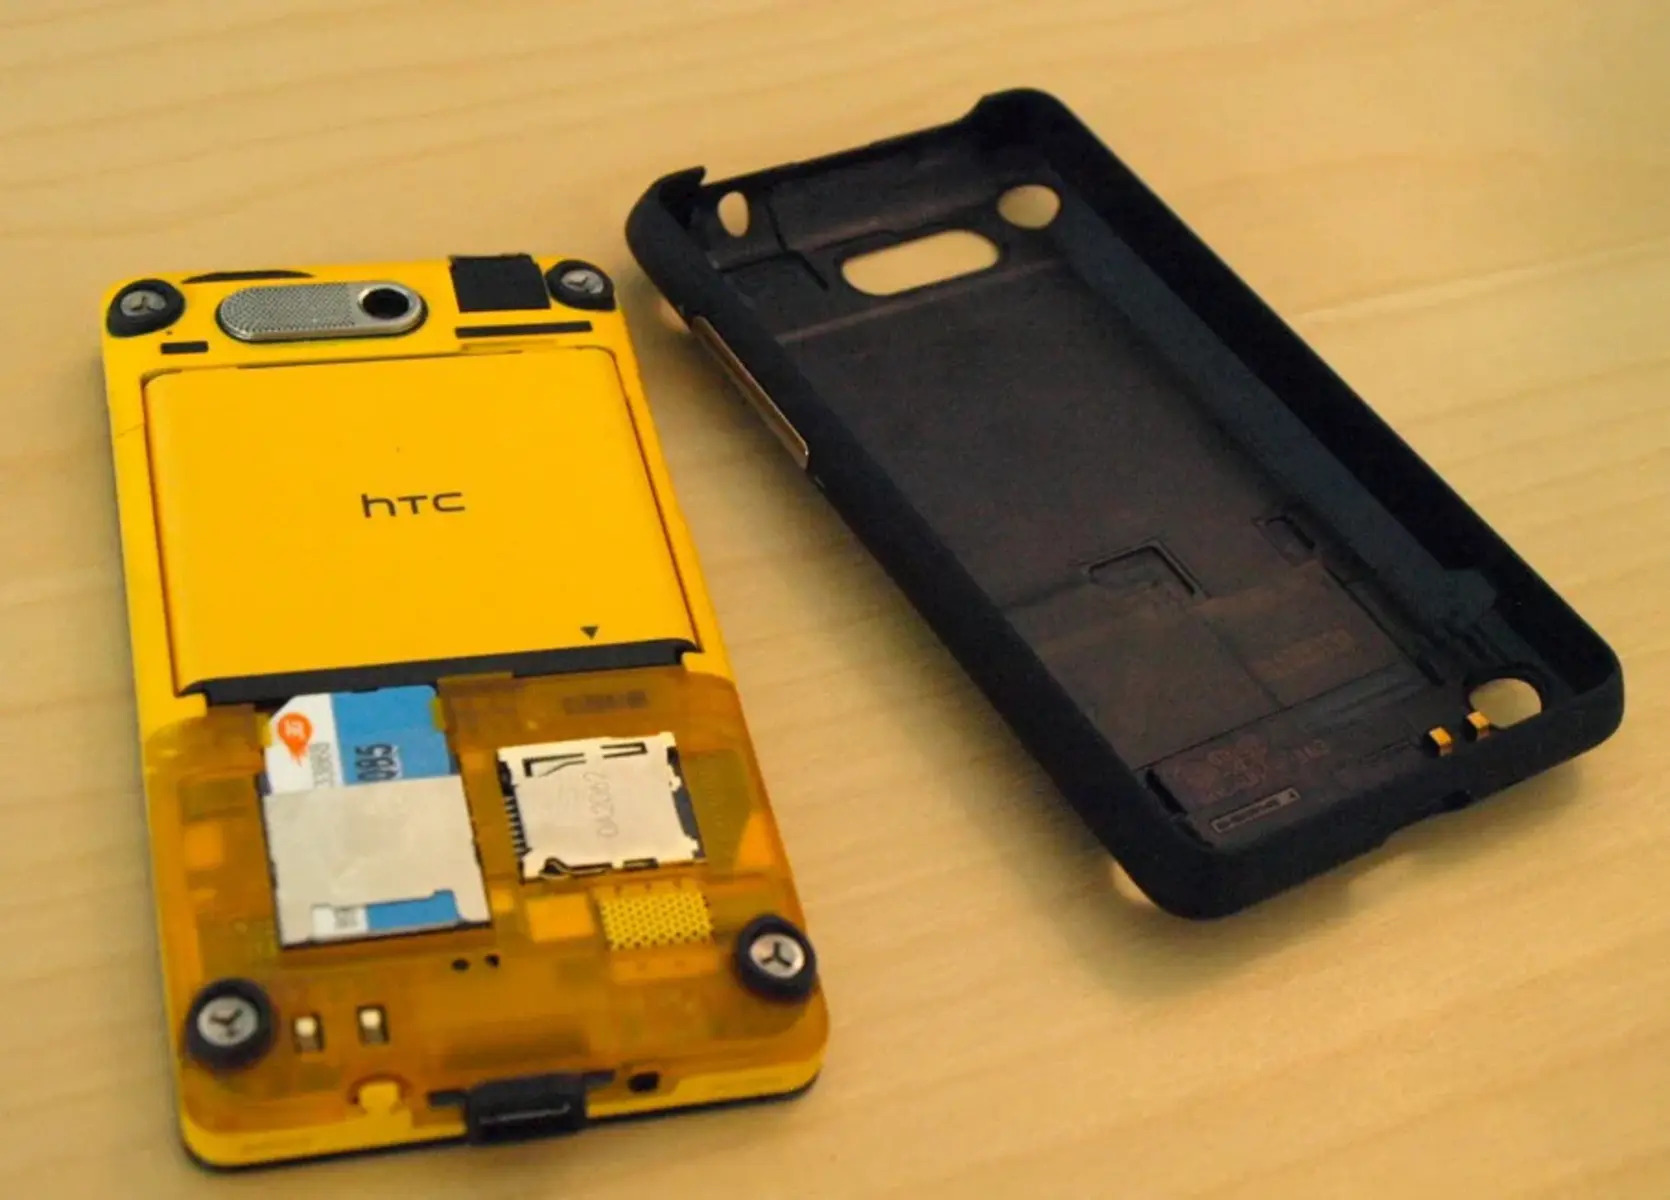 Removing SIM Card From HTC Aria: Step-by-Step Guide